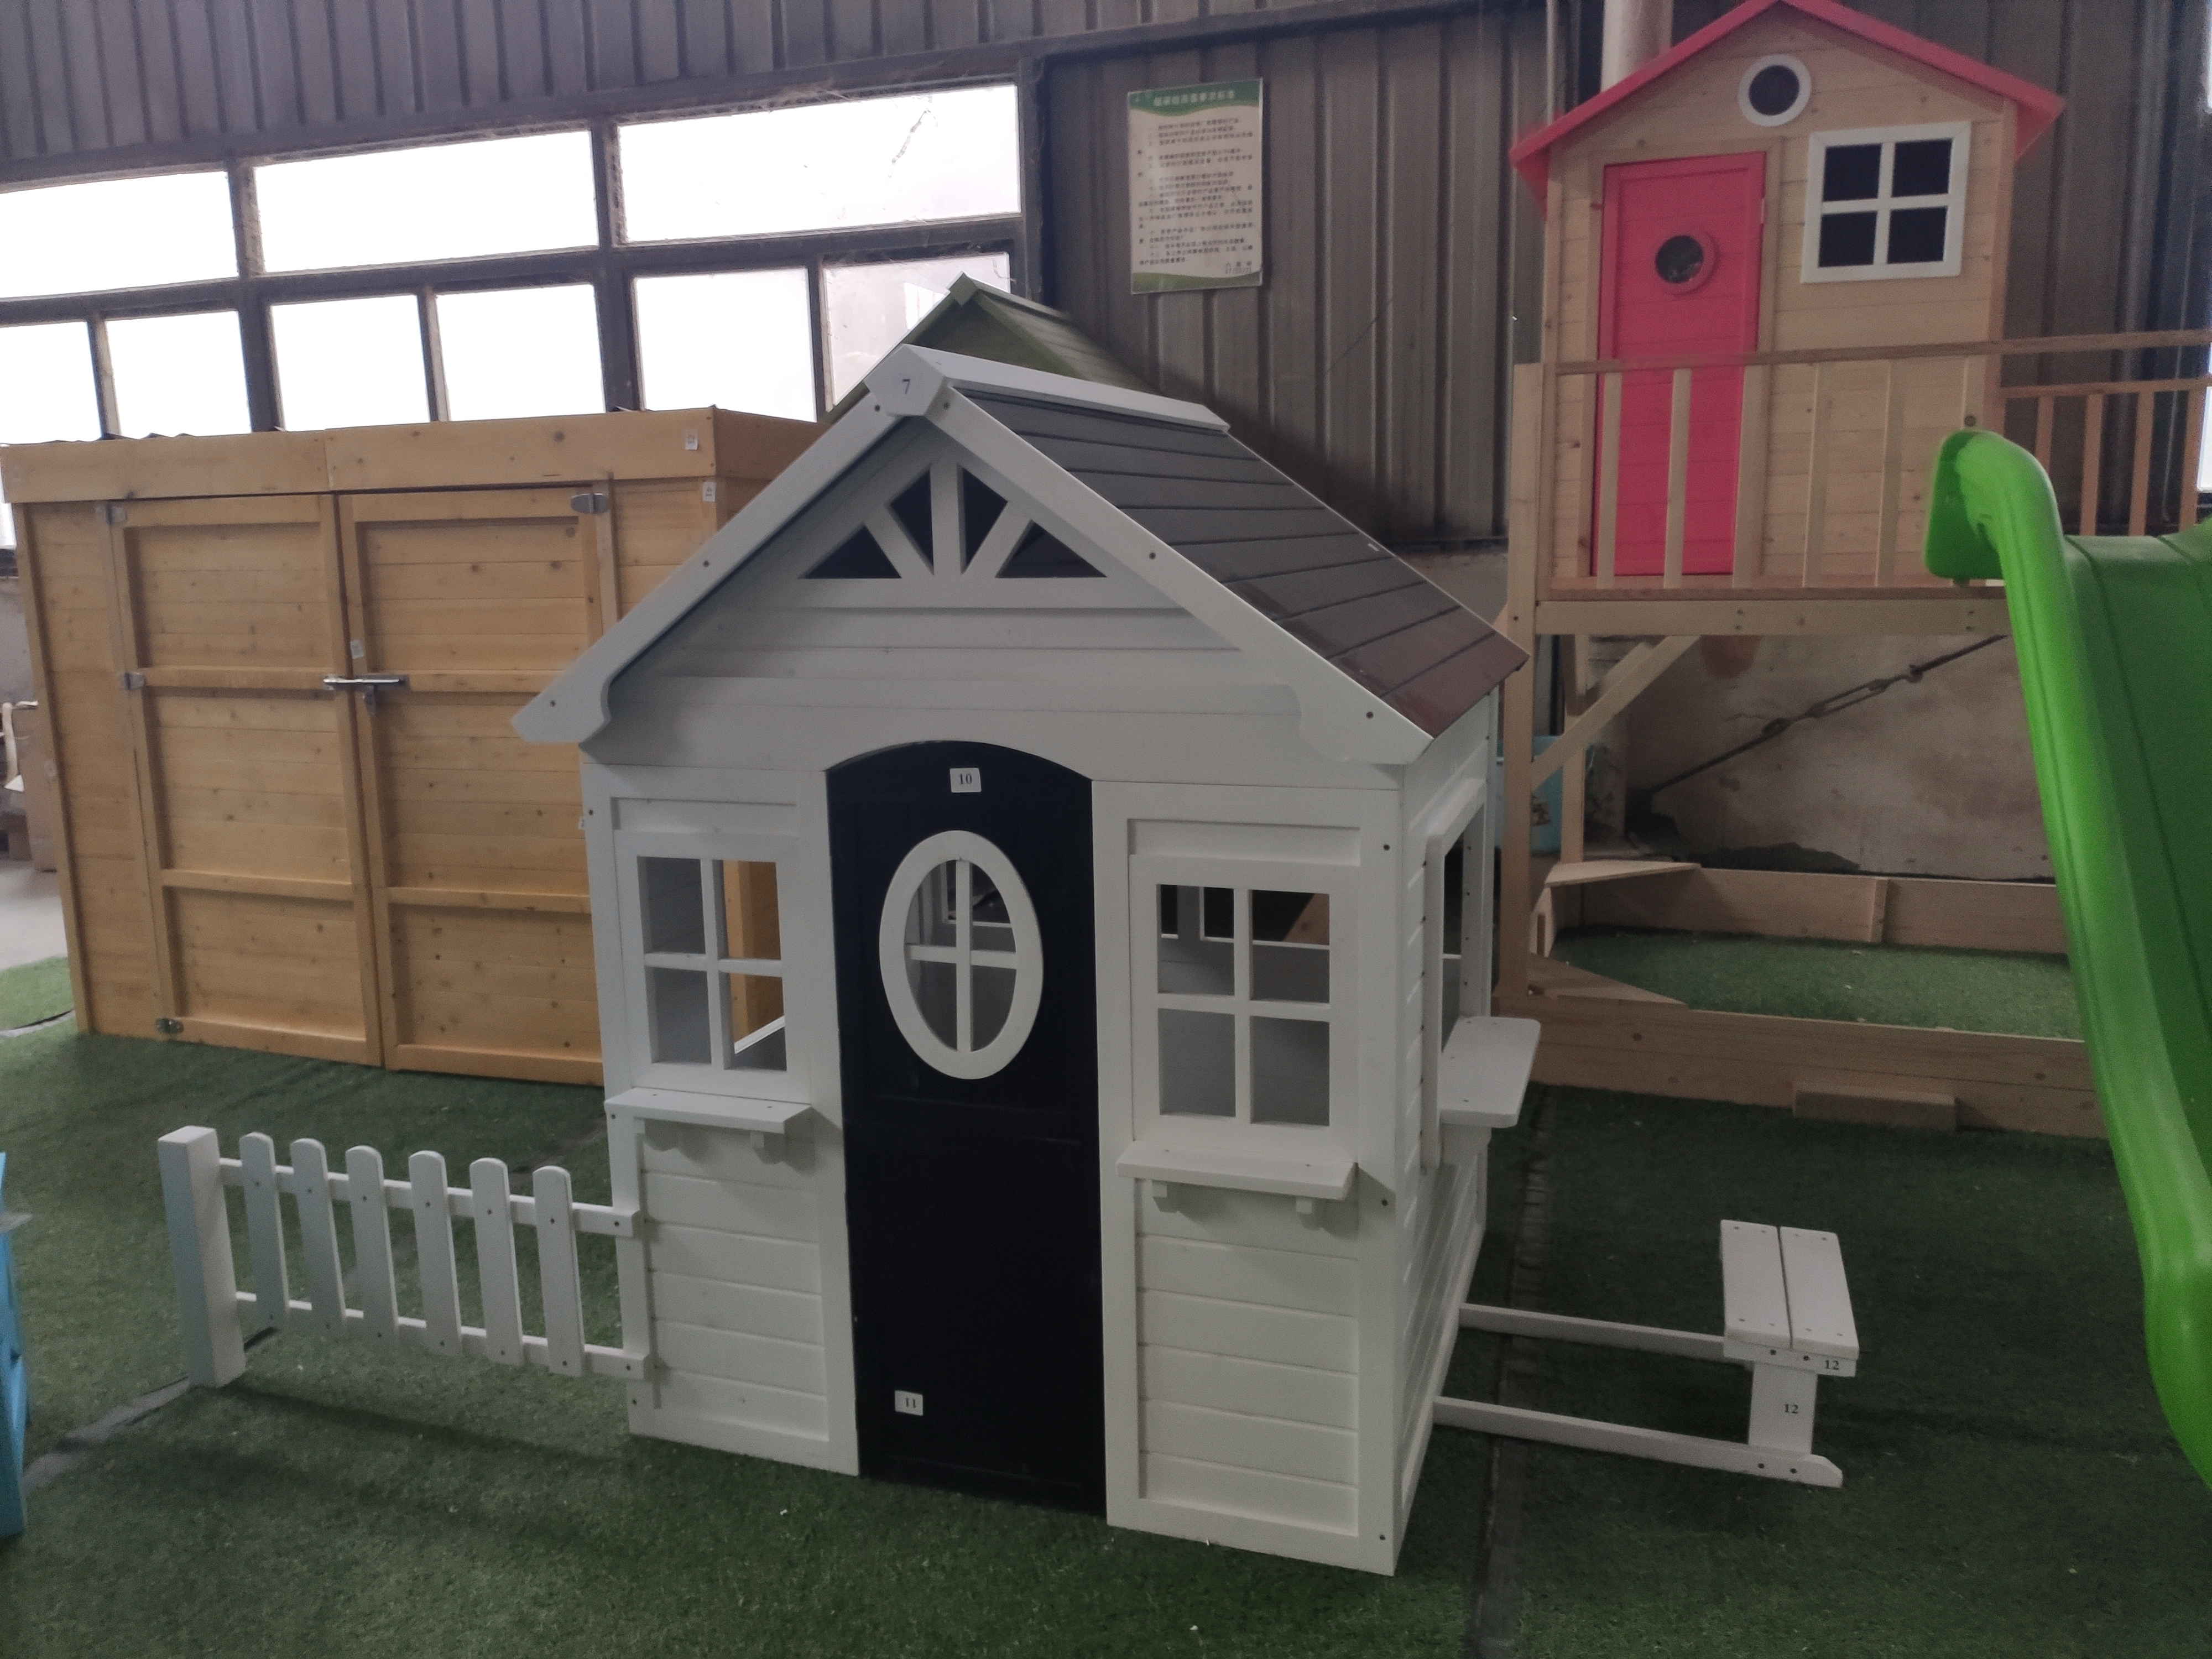 Give your kids’ cubby house a fabulous facelift for summer